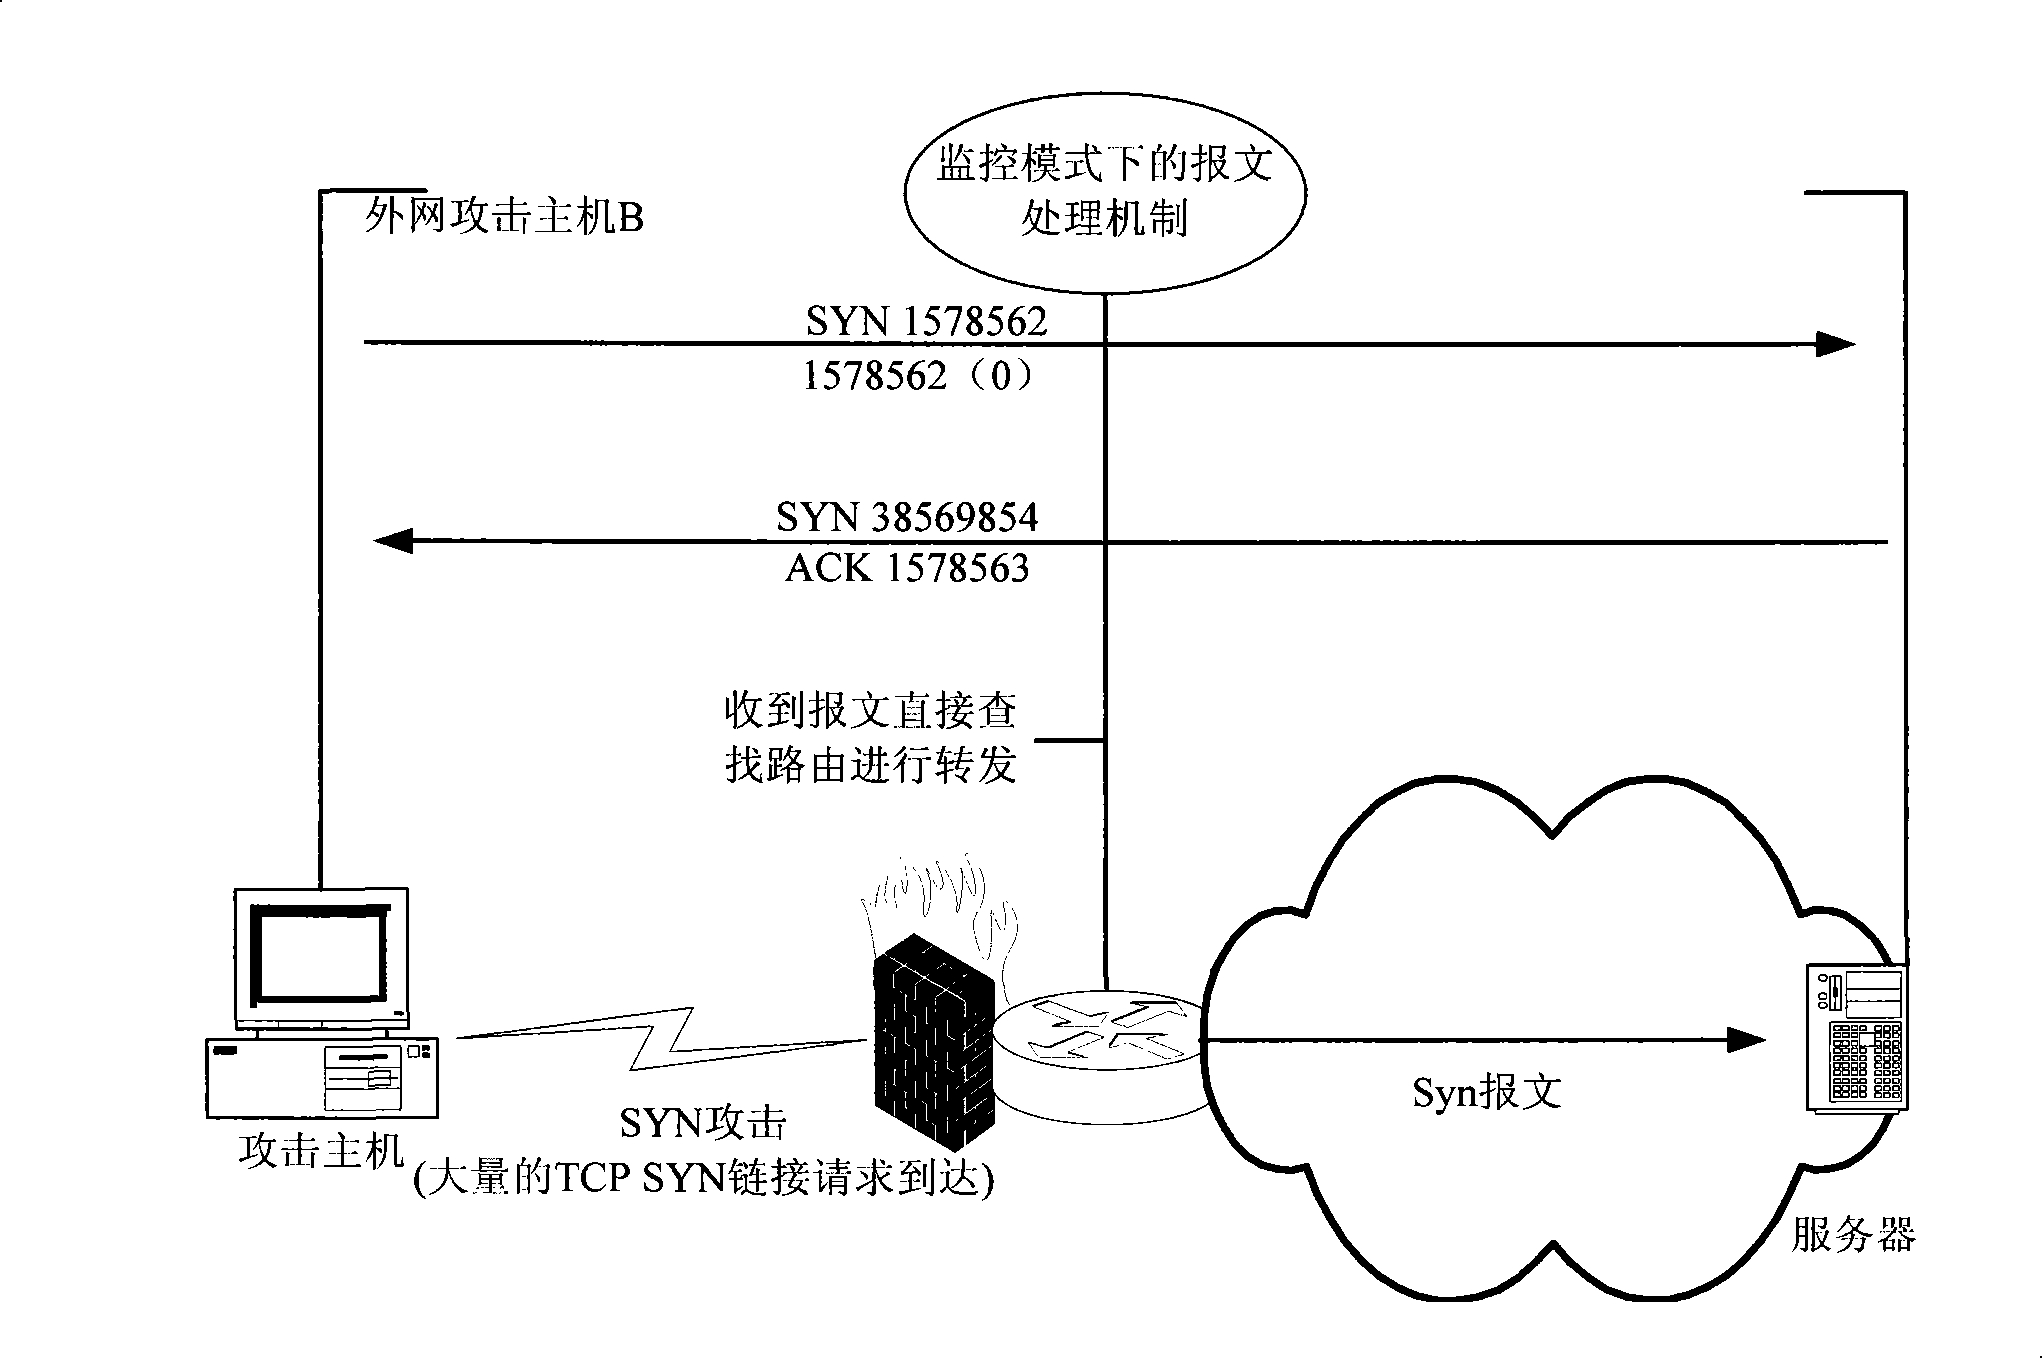 Method of preventing syn flood and router equipment